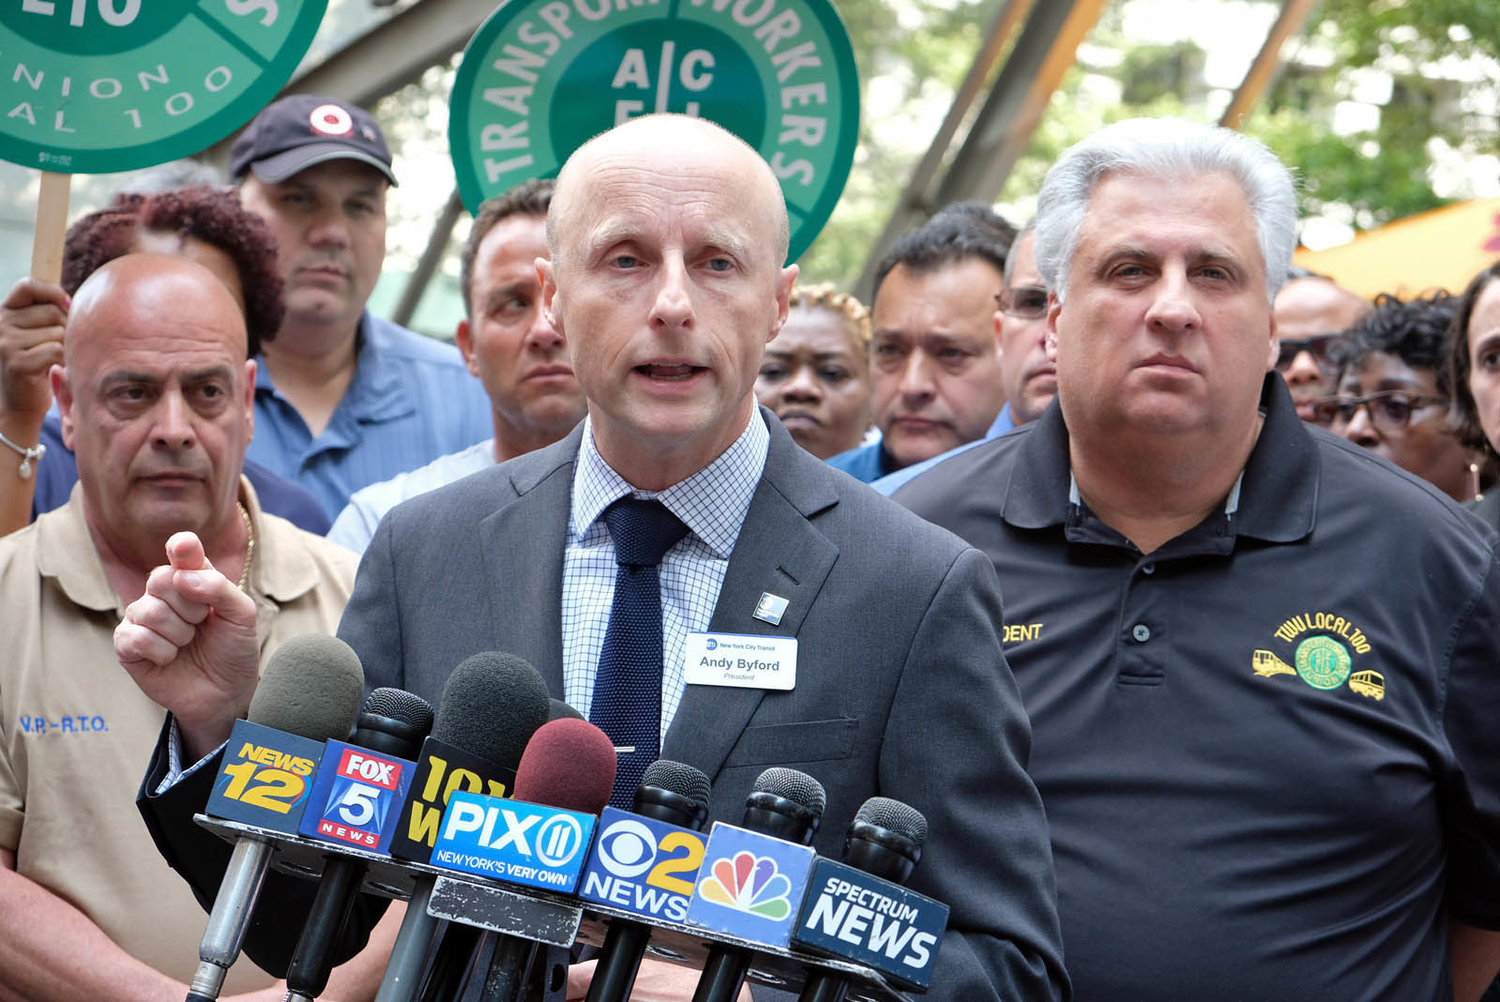 ‘DISGUSTING AND APPALLING’: Metropolitan Transportation Authority CEO Andy Byford vowed to press for serious jail time for those who assault transit workers, citing a recent incident captured on video of ‘one of our Conductors being absolutely pummeled’ by three riders angry that their train would skip local stops. At his left is Transport Workers Union Local 100 President Tony Utano, who said Conductors would begin wearing body cameras to make it easier to identify and apprehend their assailants.